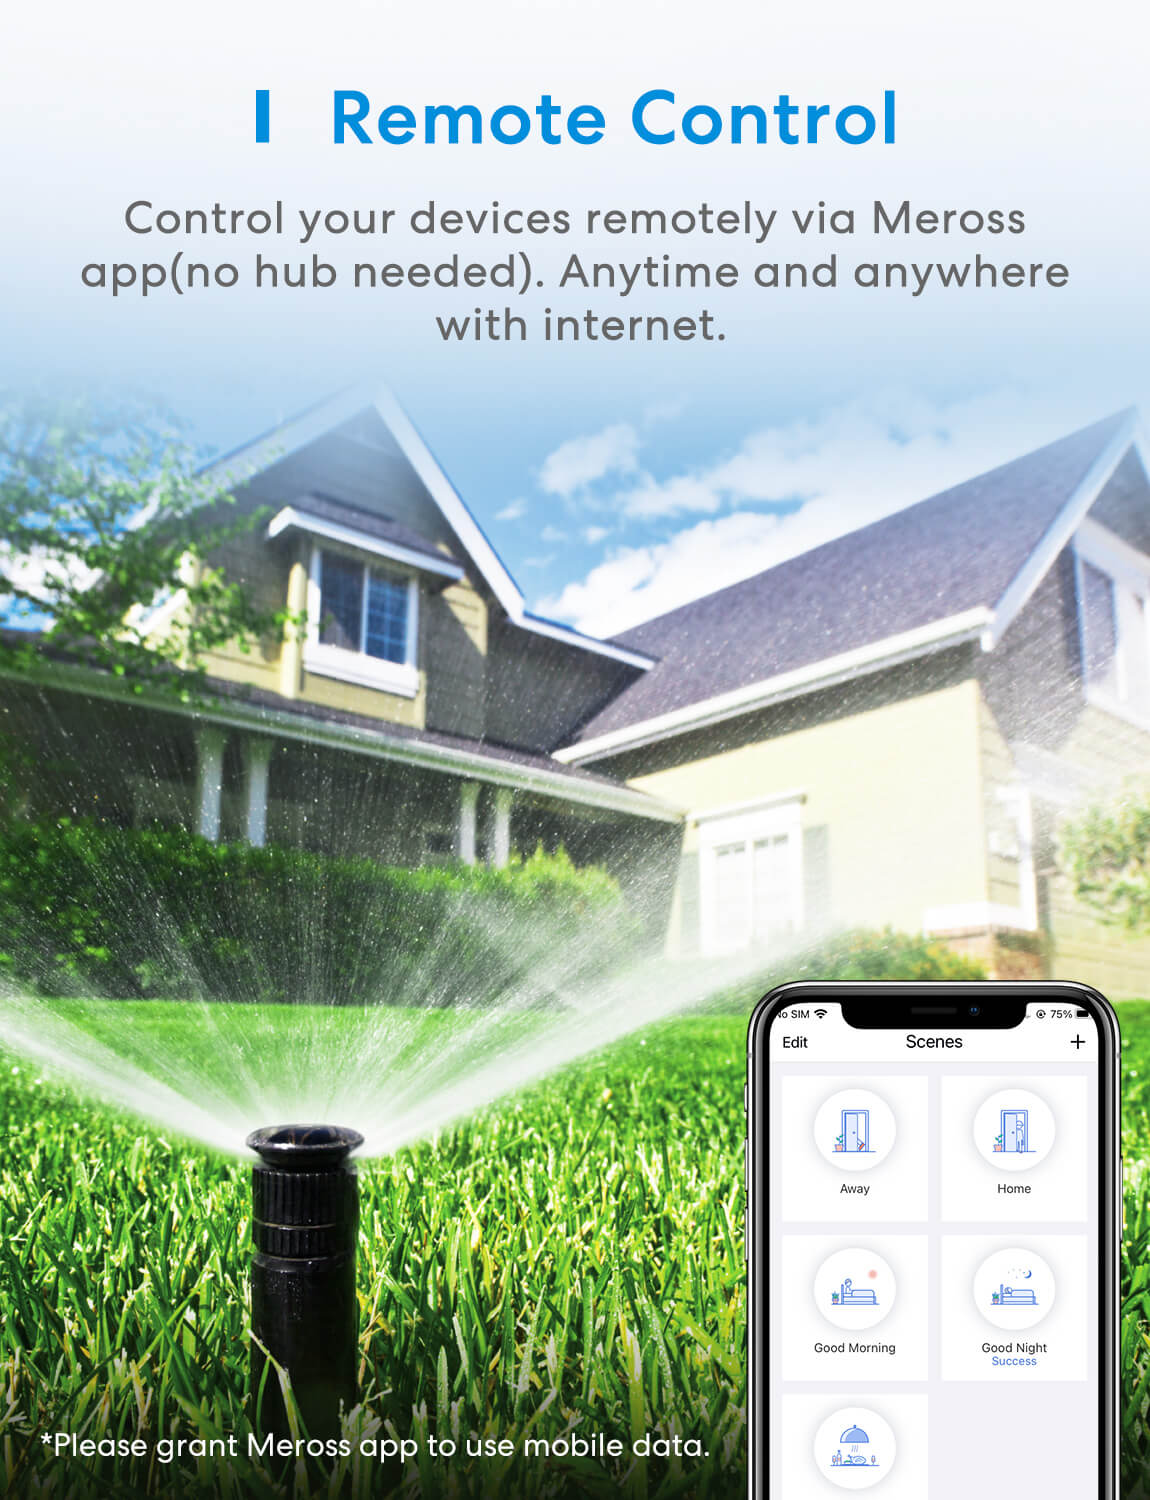 Meross Outdoor Smart Plug, Wi-Fi Outlet with 2 Grounded Outlets